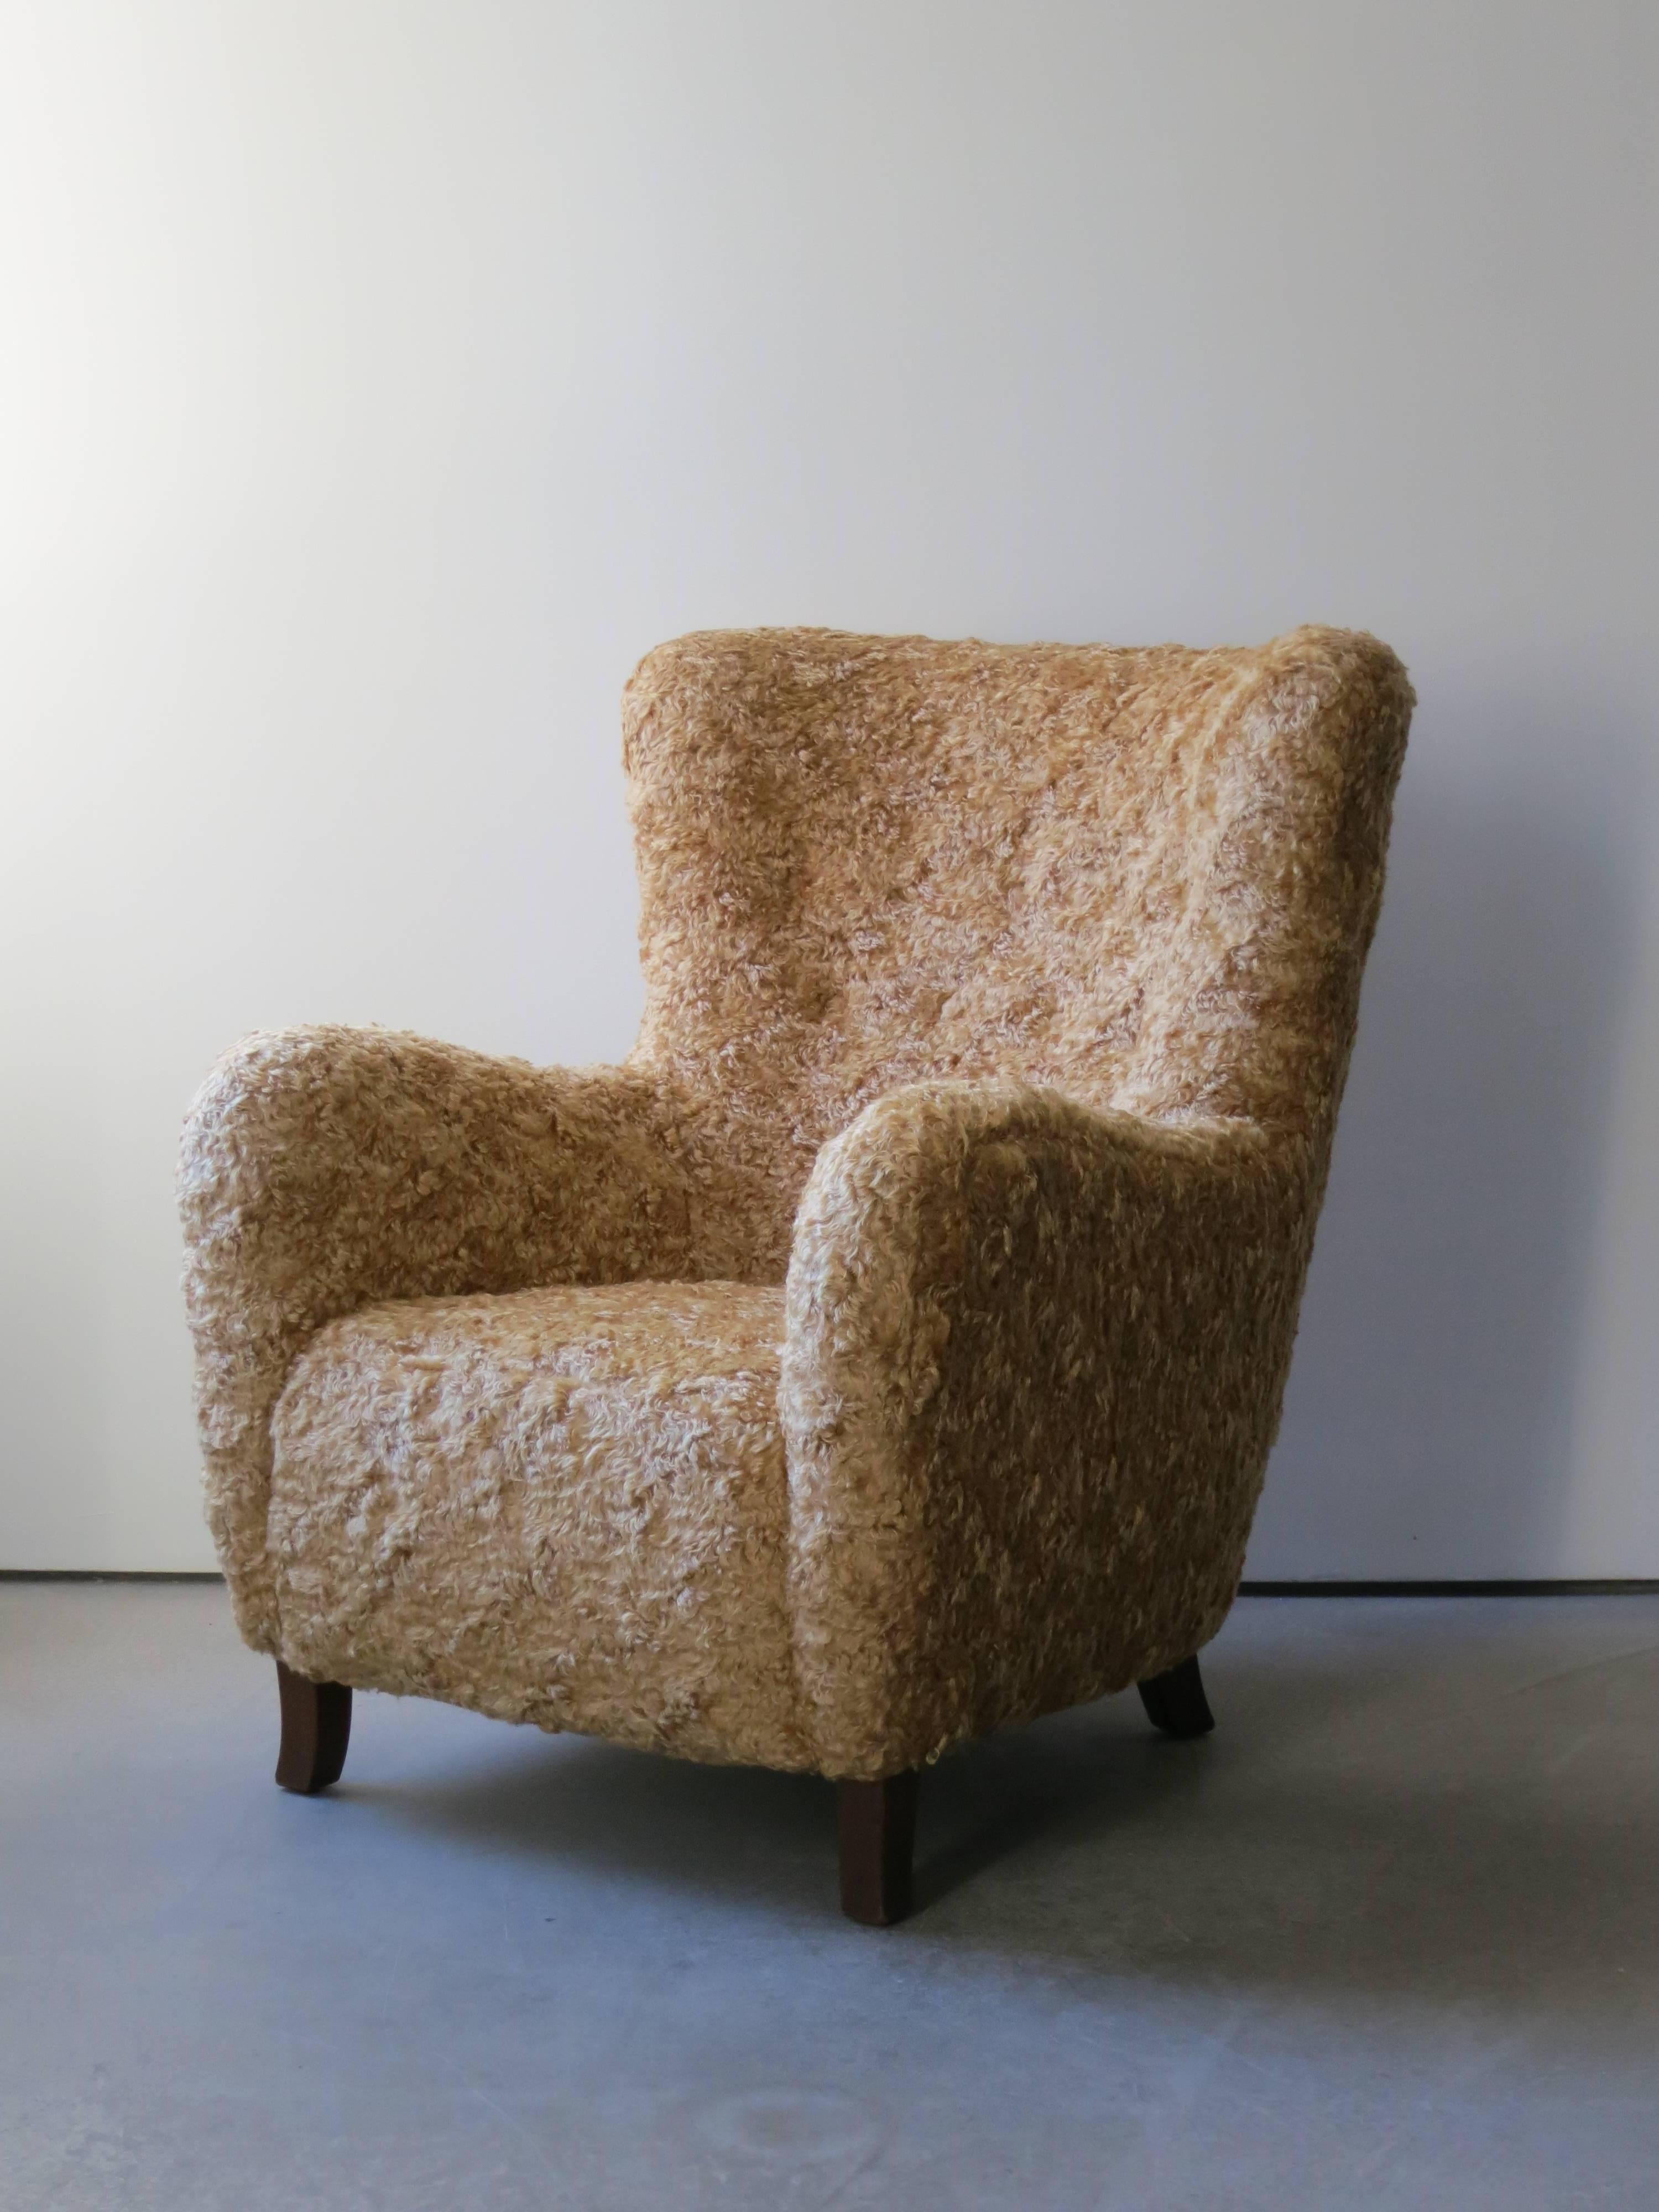 This comfortable lounge chair was designed and made in the 1940s by a Danish master cabinetmaker. The mohair upholstery lends the chair an extra layer of comfort and warmth.